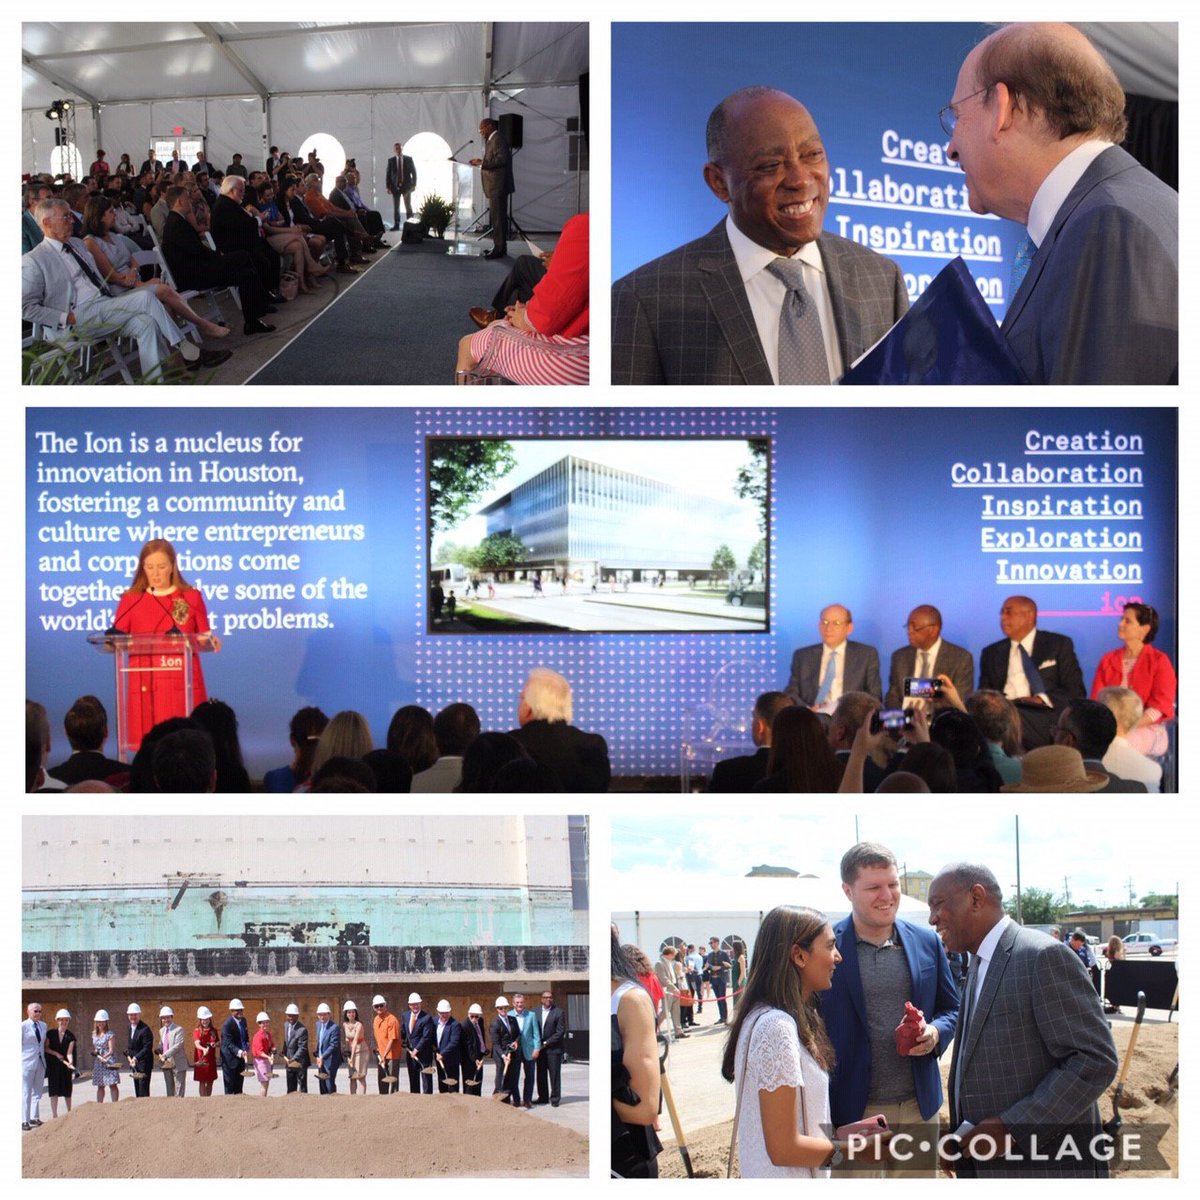 We are becoming a hub for #innovation & #imagination. In #Houston, #TechJobs have gone up 140% in 1 year & we have over 3,000 tech startups here today. With the groundbreaking of #IonHouston this week, Houston is sprinting toward becoming #SiliconBayou. 

#TechStartups #SmartCity